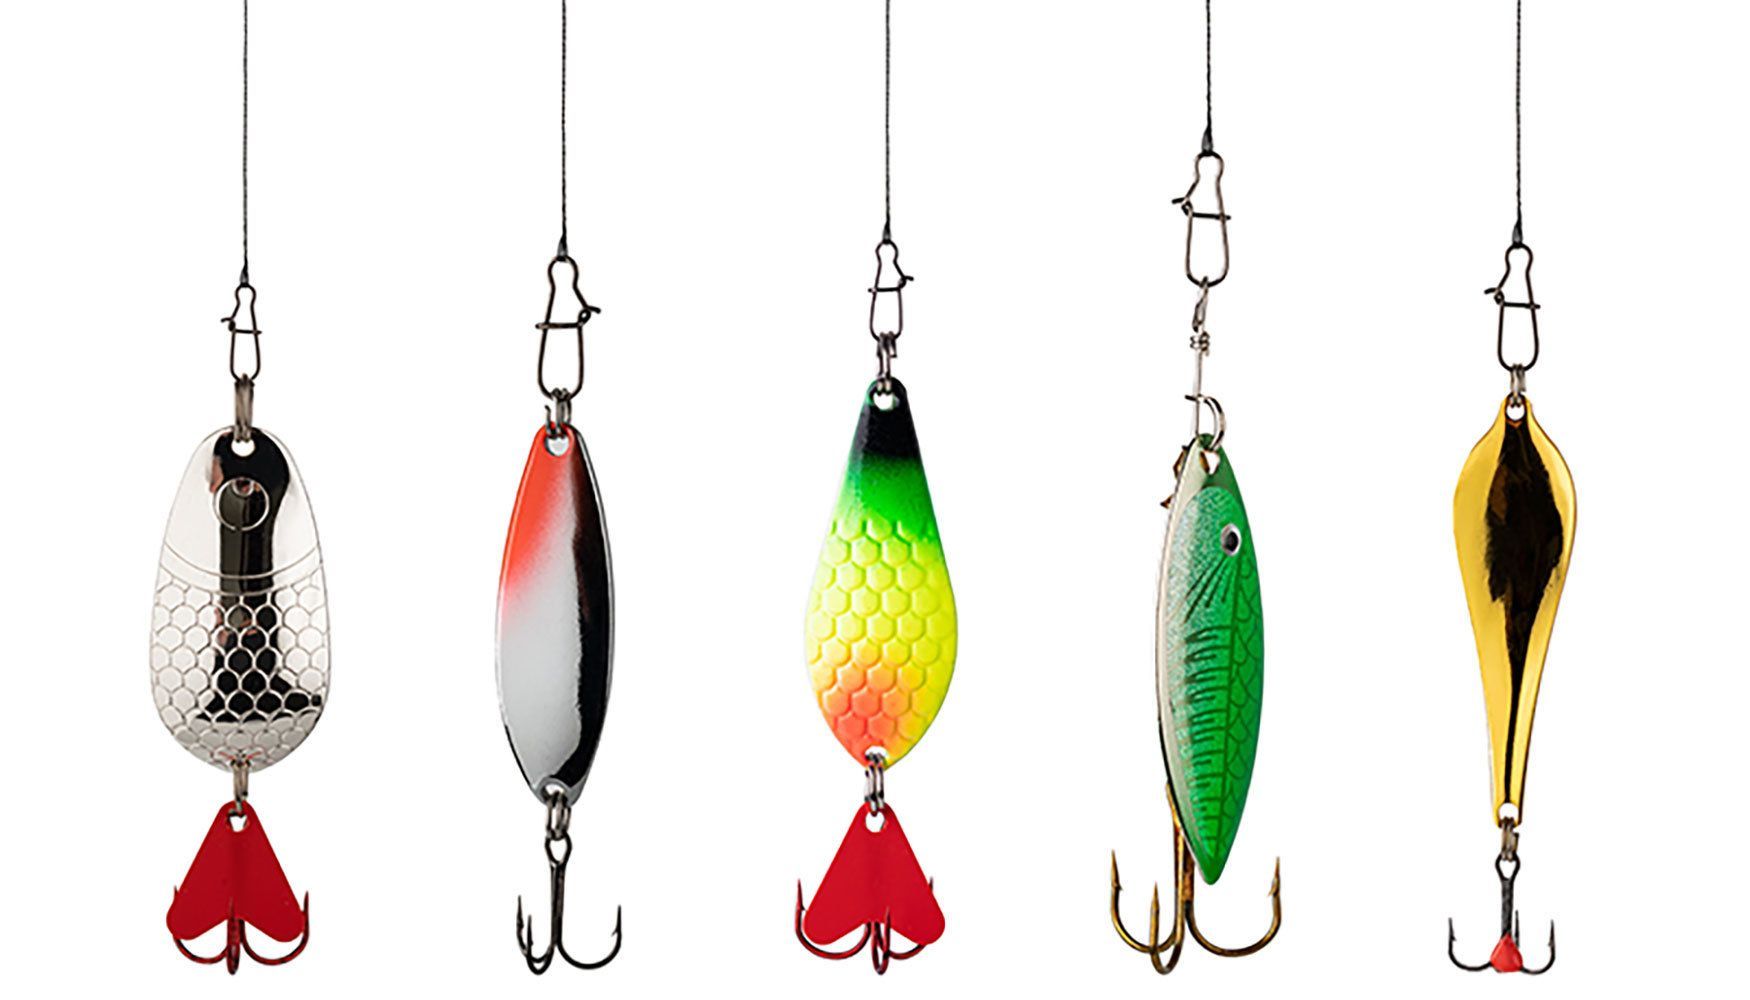 Various colorful fishing lures.